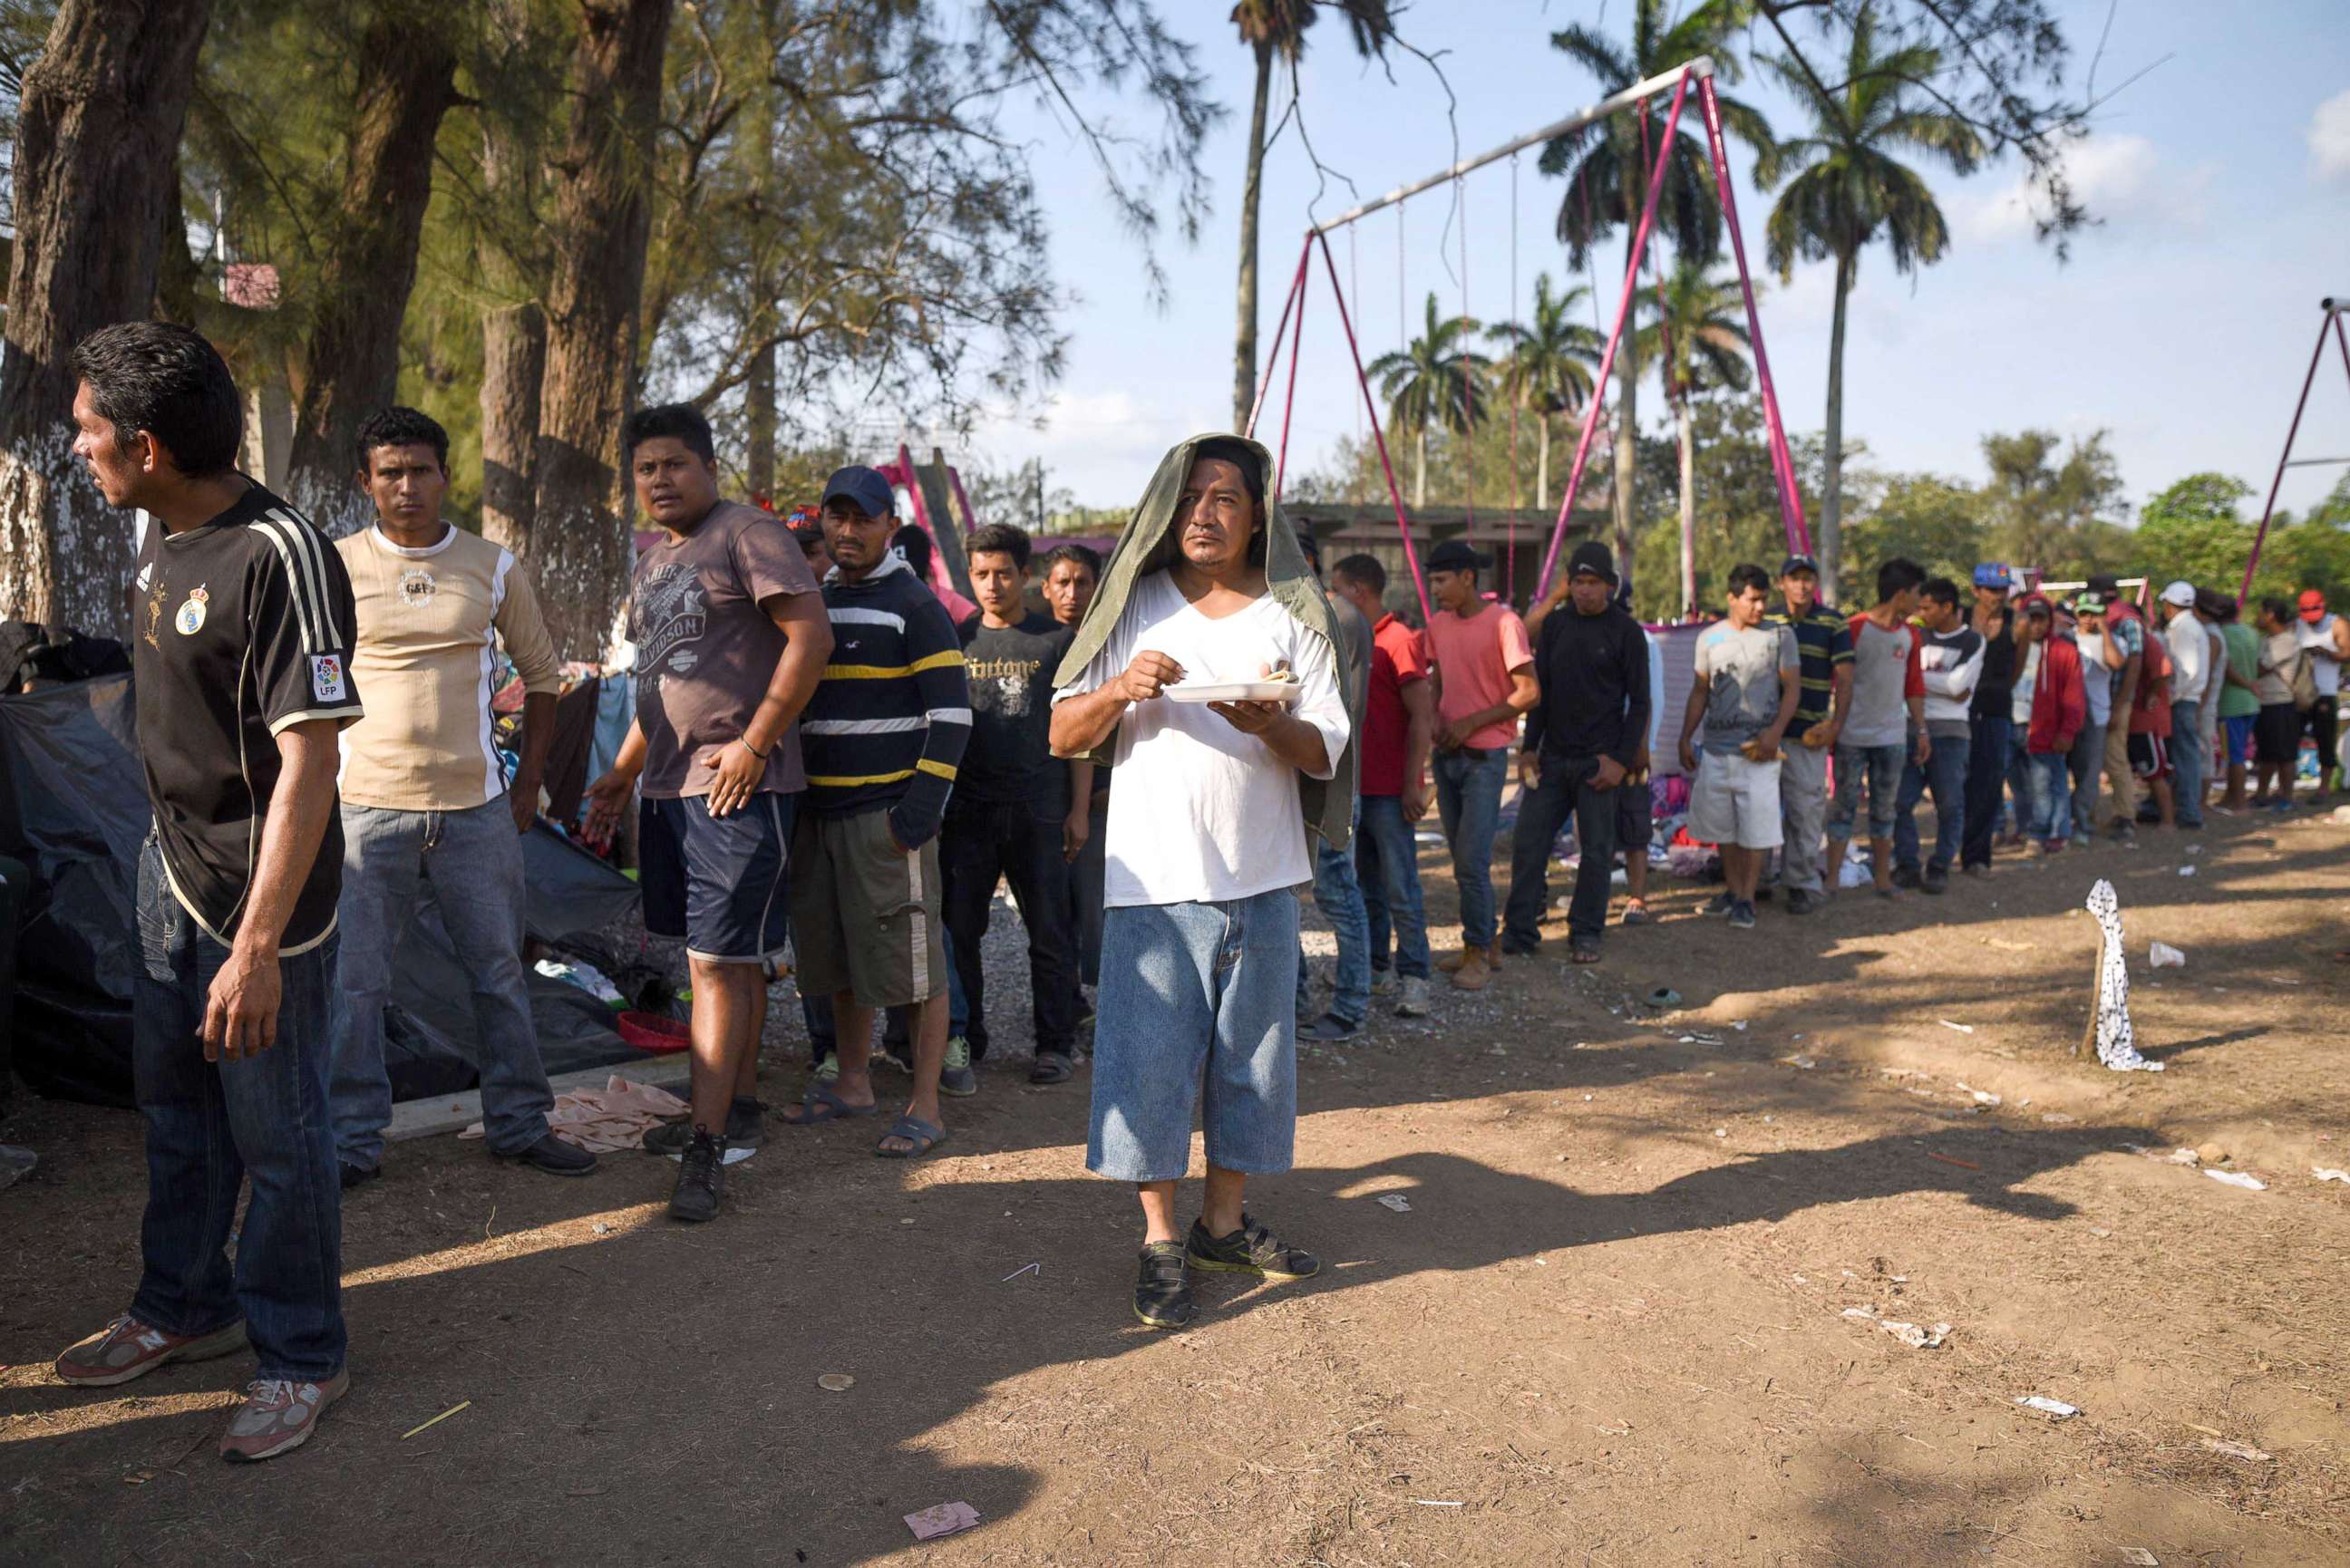 PHOTO: Central American migrants taking part in the "Migrant Via Crucis" caravan towards the U.S. queue for breakfast as they camp at a sport complex in Matias Romero, Oaxaca State, Mexico, April 4, 2018.